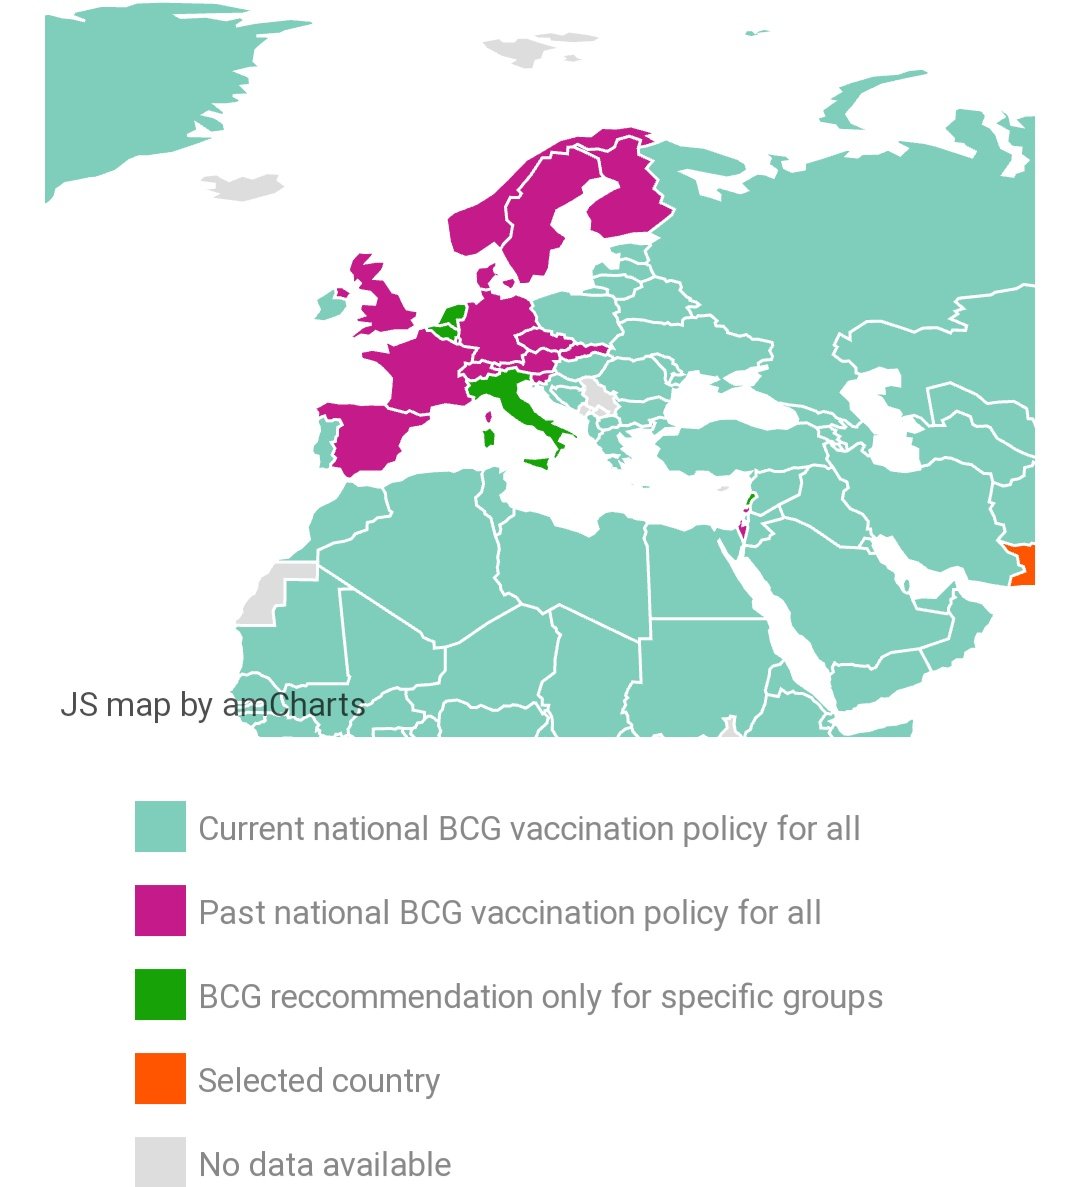 This is SUCH a great piece of research  @maryam_nasim!!!Here is a map from research approved  http://www.bcgatlas.org/ . And it validates your point. Have a look at Europe. (Italy has no bcg vaccination. Other EU countries have specific bcg immunization)  https://twitter.com/maryam_nasim/status/1245373495749619720